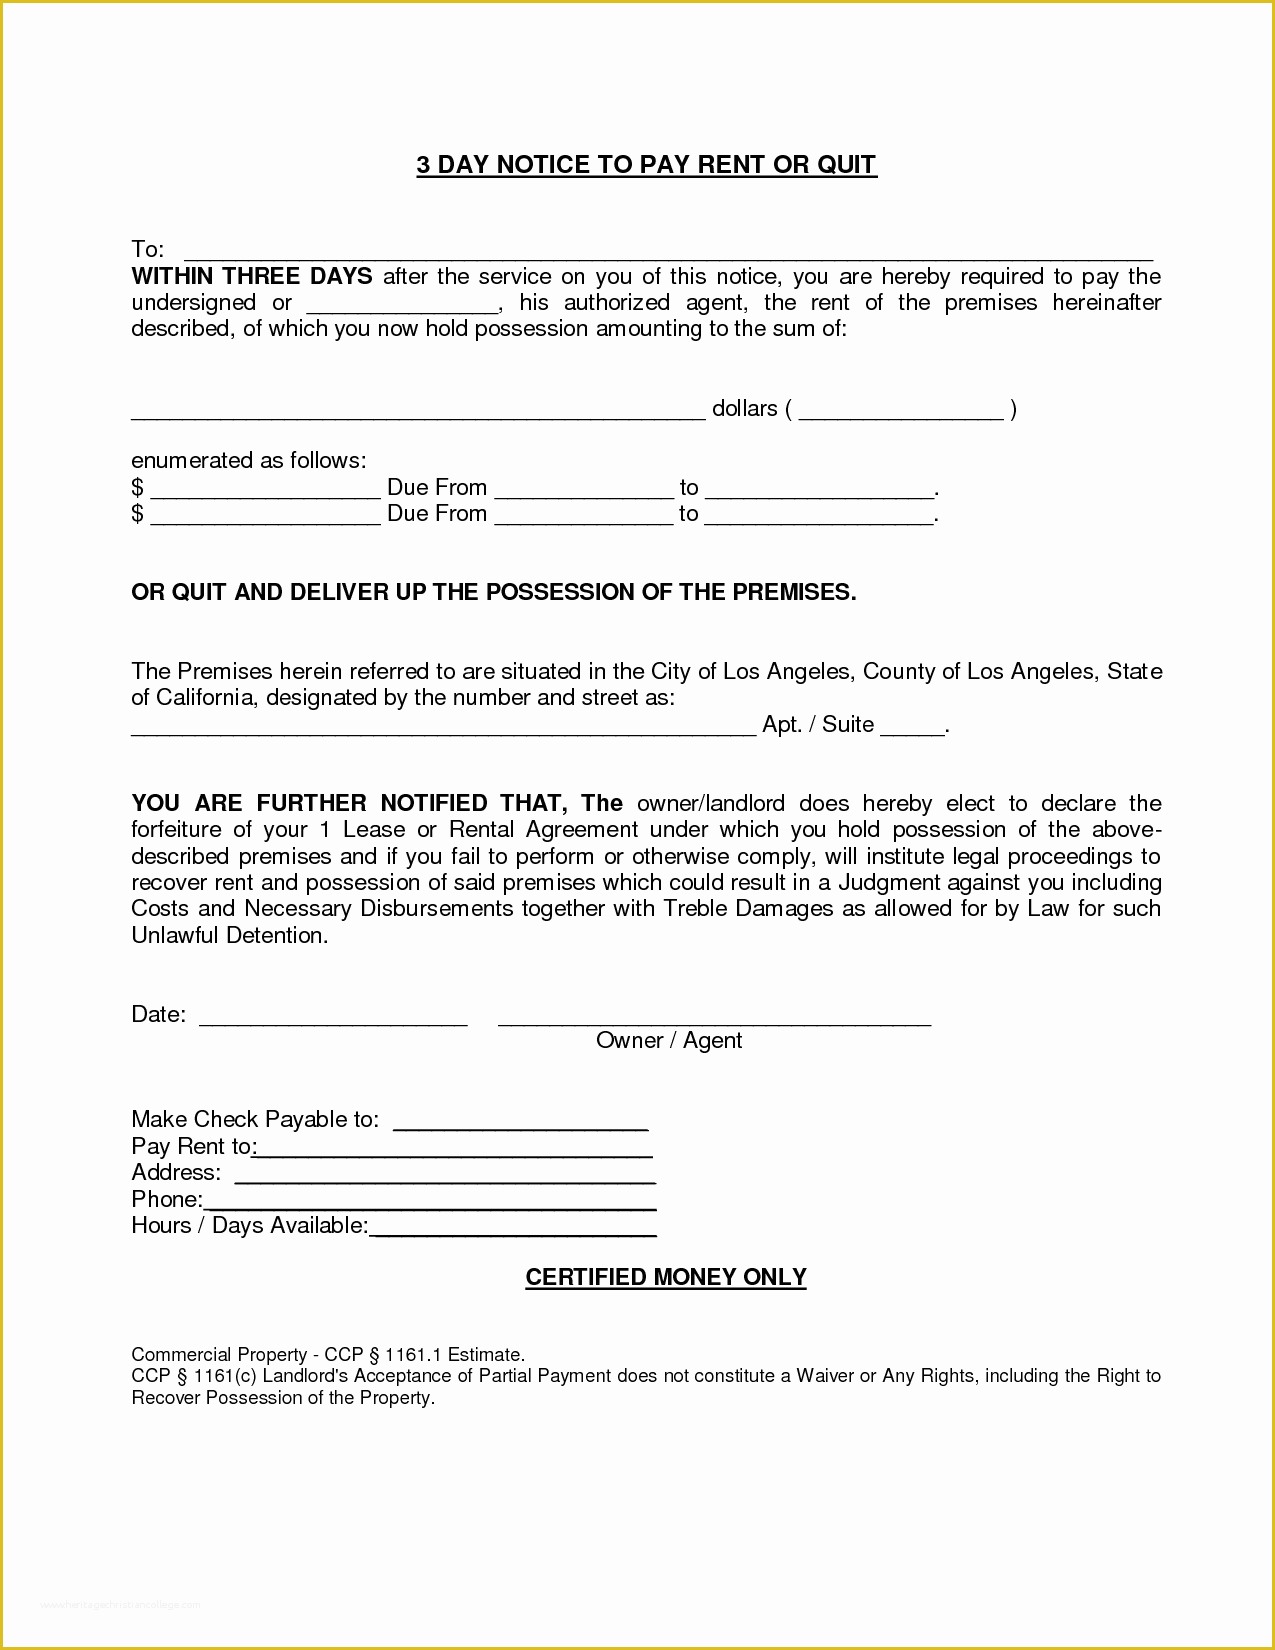 Free Notice to Pay Rent or Quit Template Of 10 Best Of 3 Day Notice by Landlord 3 Day Notice